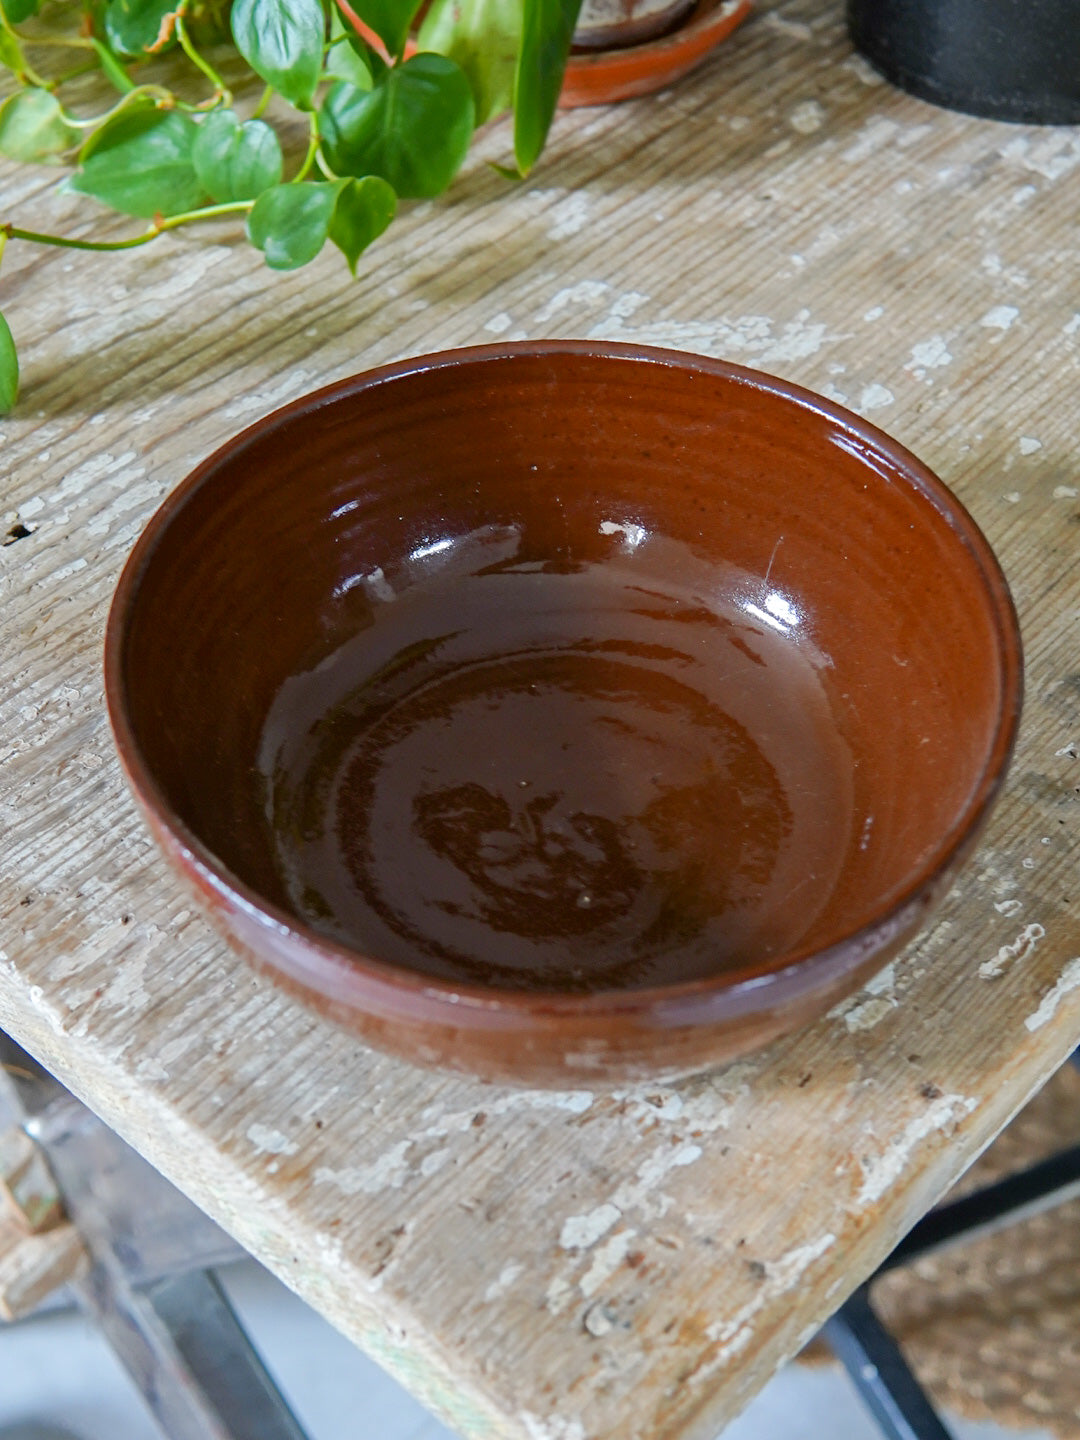 Small Serving Bowl